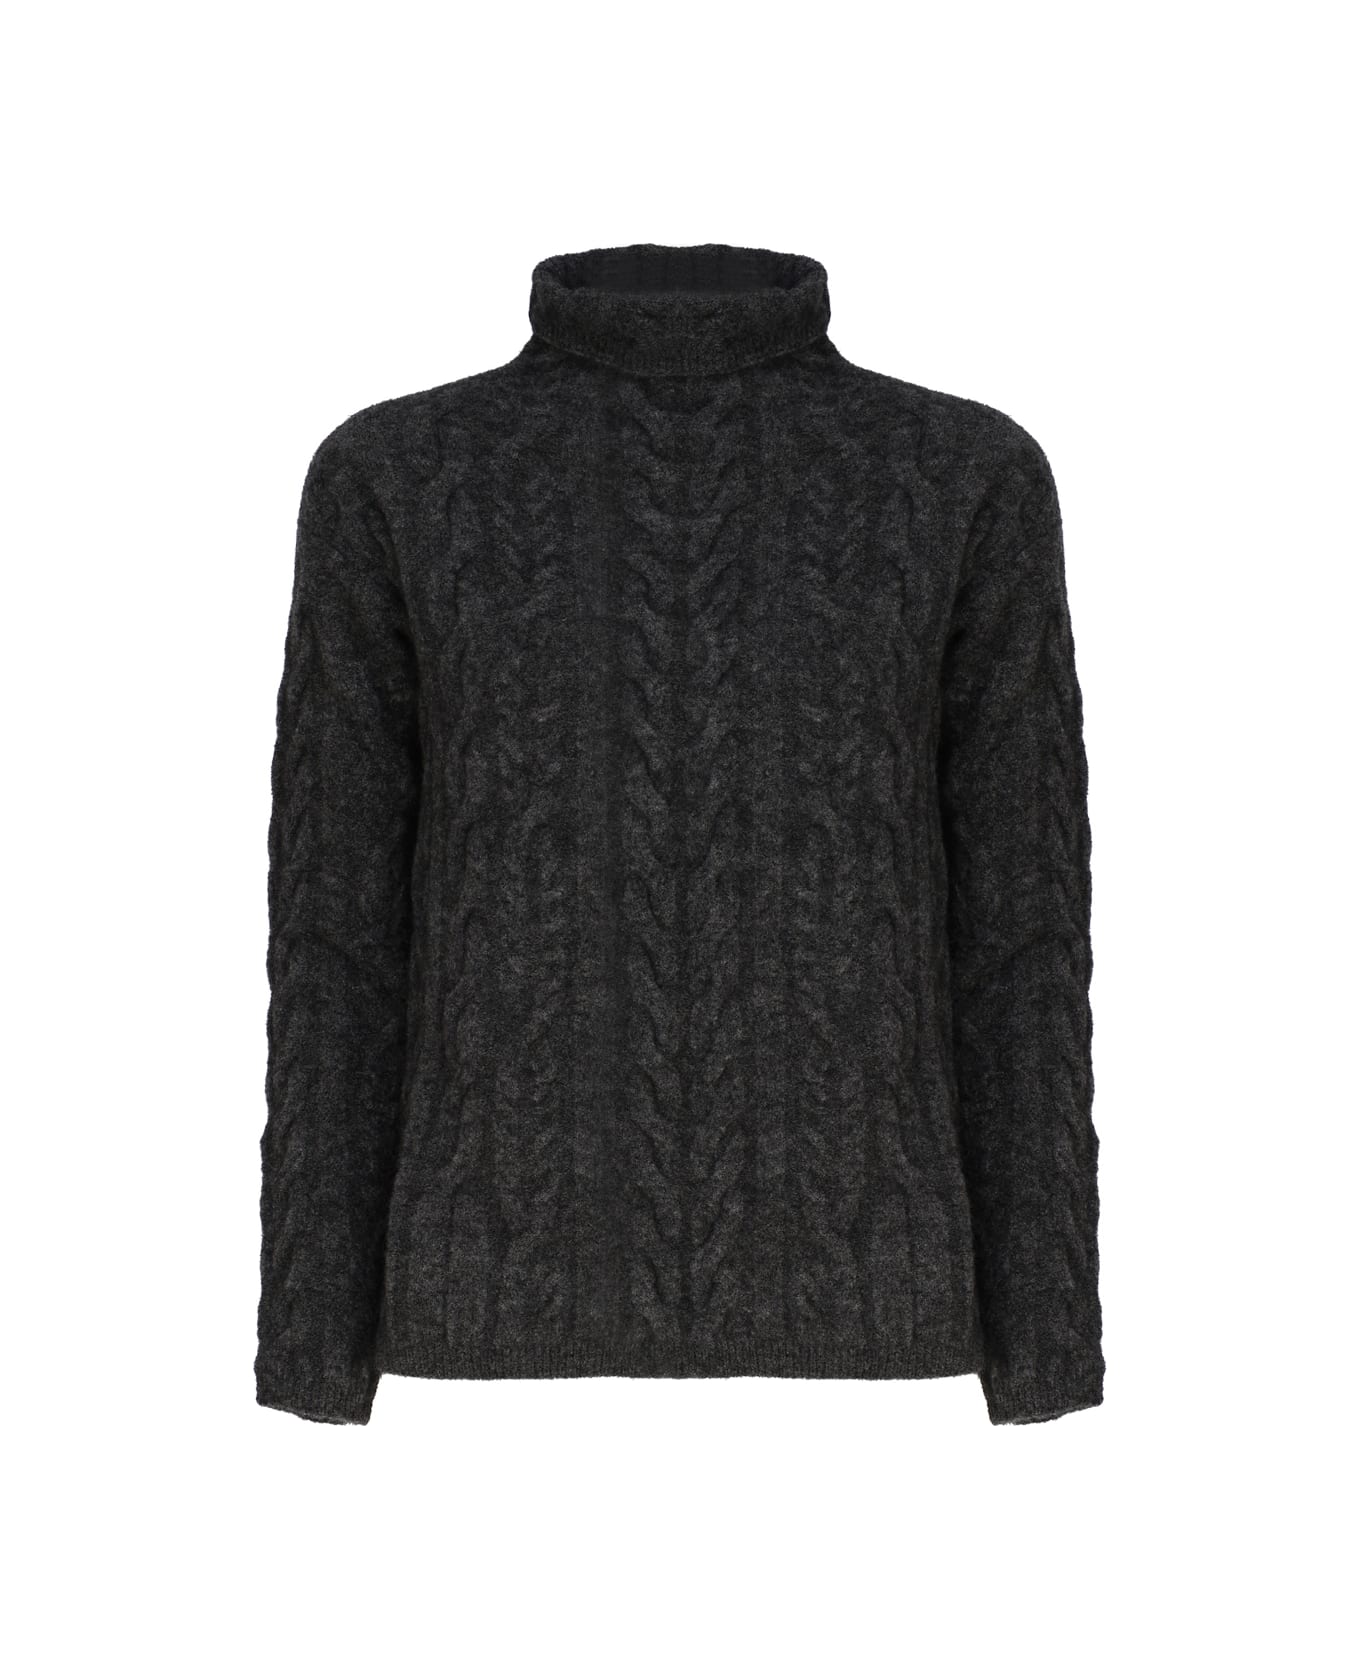 'S Max Mara Turtleneck Sweater In Wool And Mohair - Grey ニットウェア